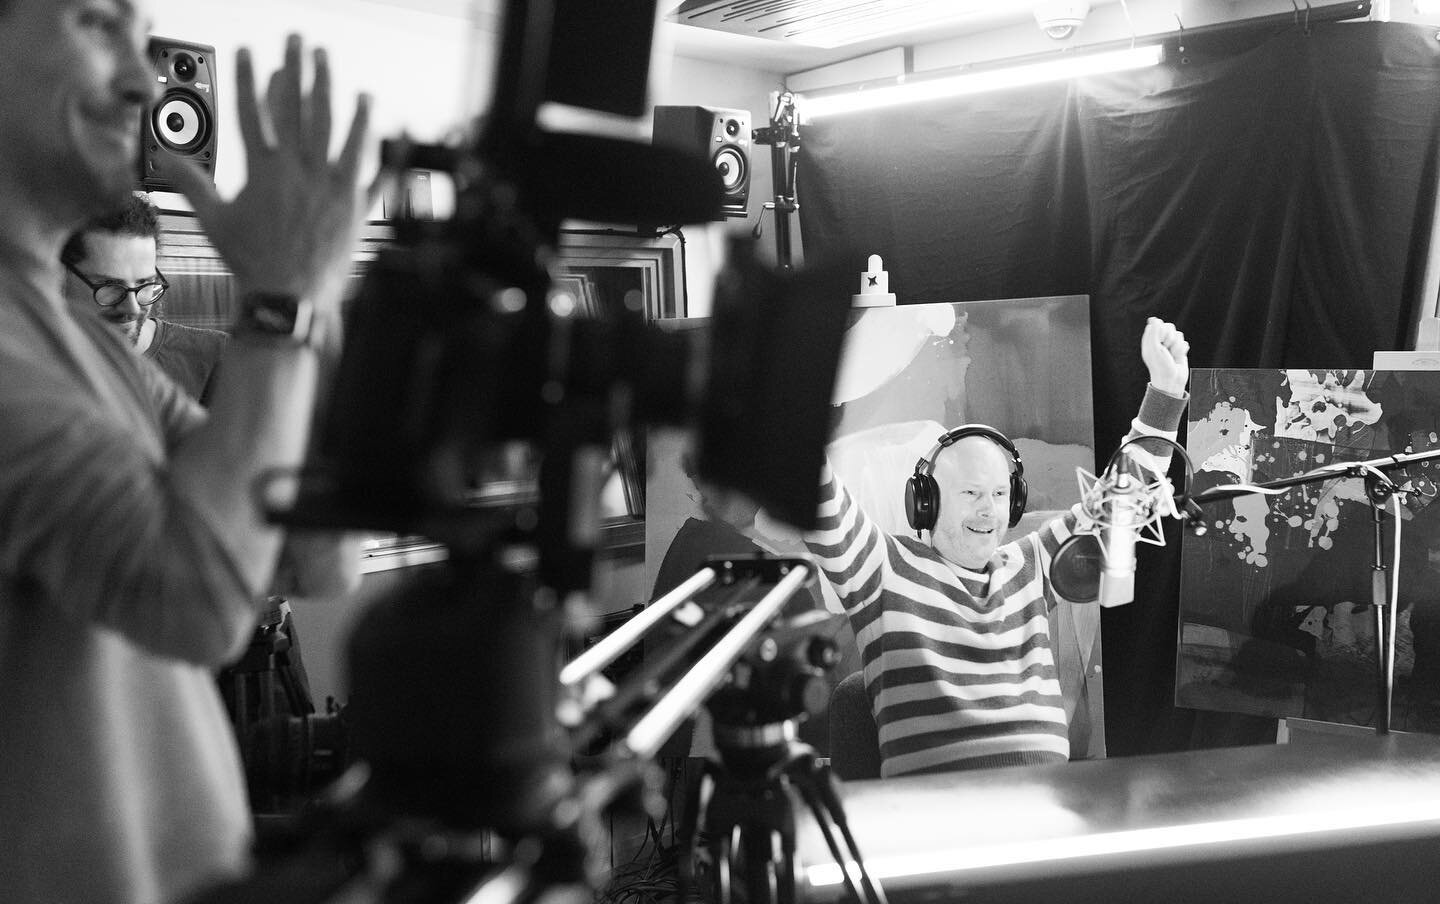 Back in November I was on a shoot for Philip Selway and Hannah Peel. Great day, Great crew and soo nice to work with an amazing bunch of people. 
#fyreflystudios #hannahpeel #philipselway #oxfordmusic #independantfilmmaker